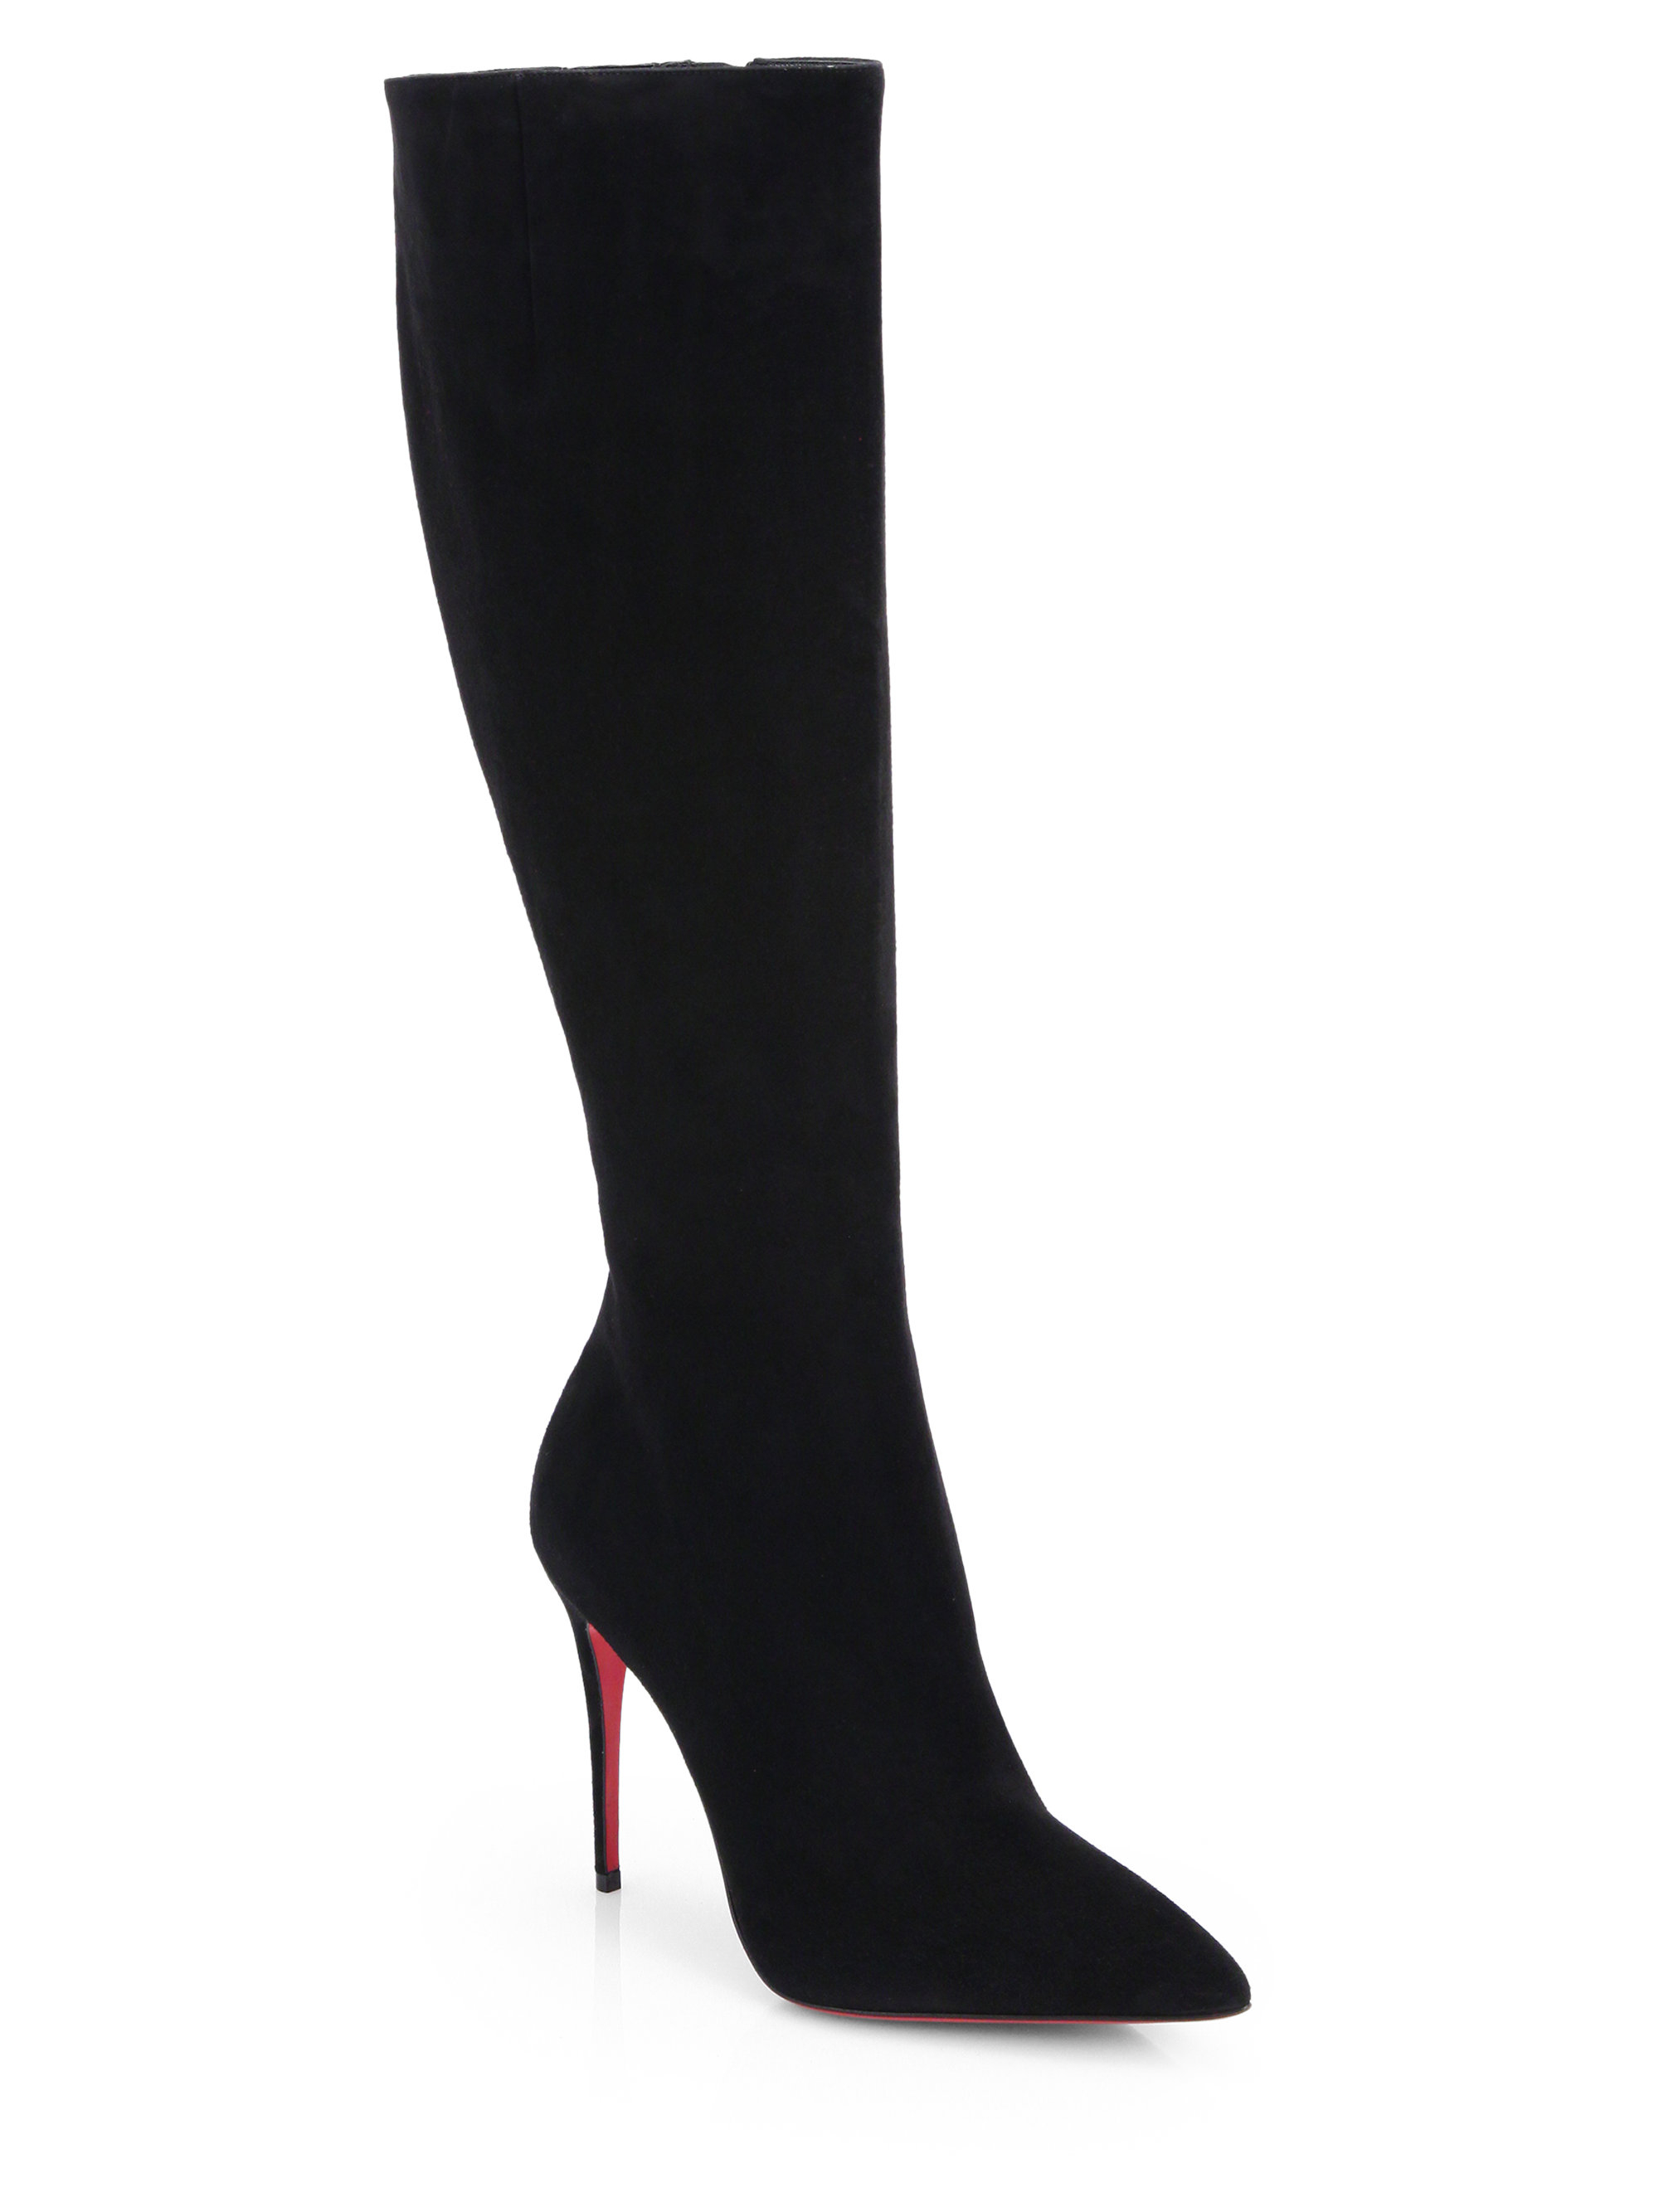 Christian Louboutin Tournoi Suede Knee-High Boots in Black | Lyst